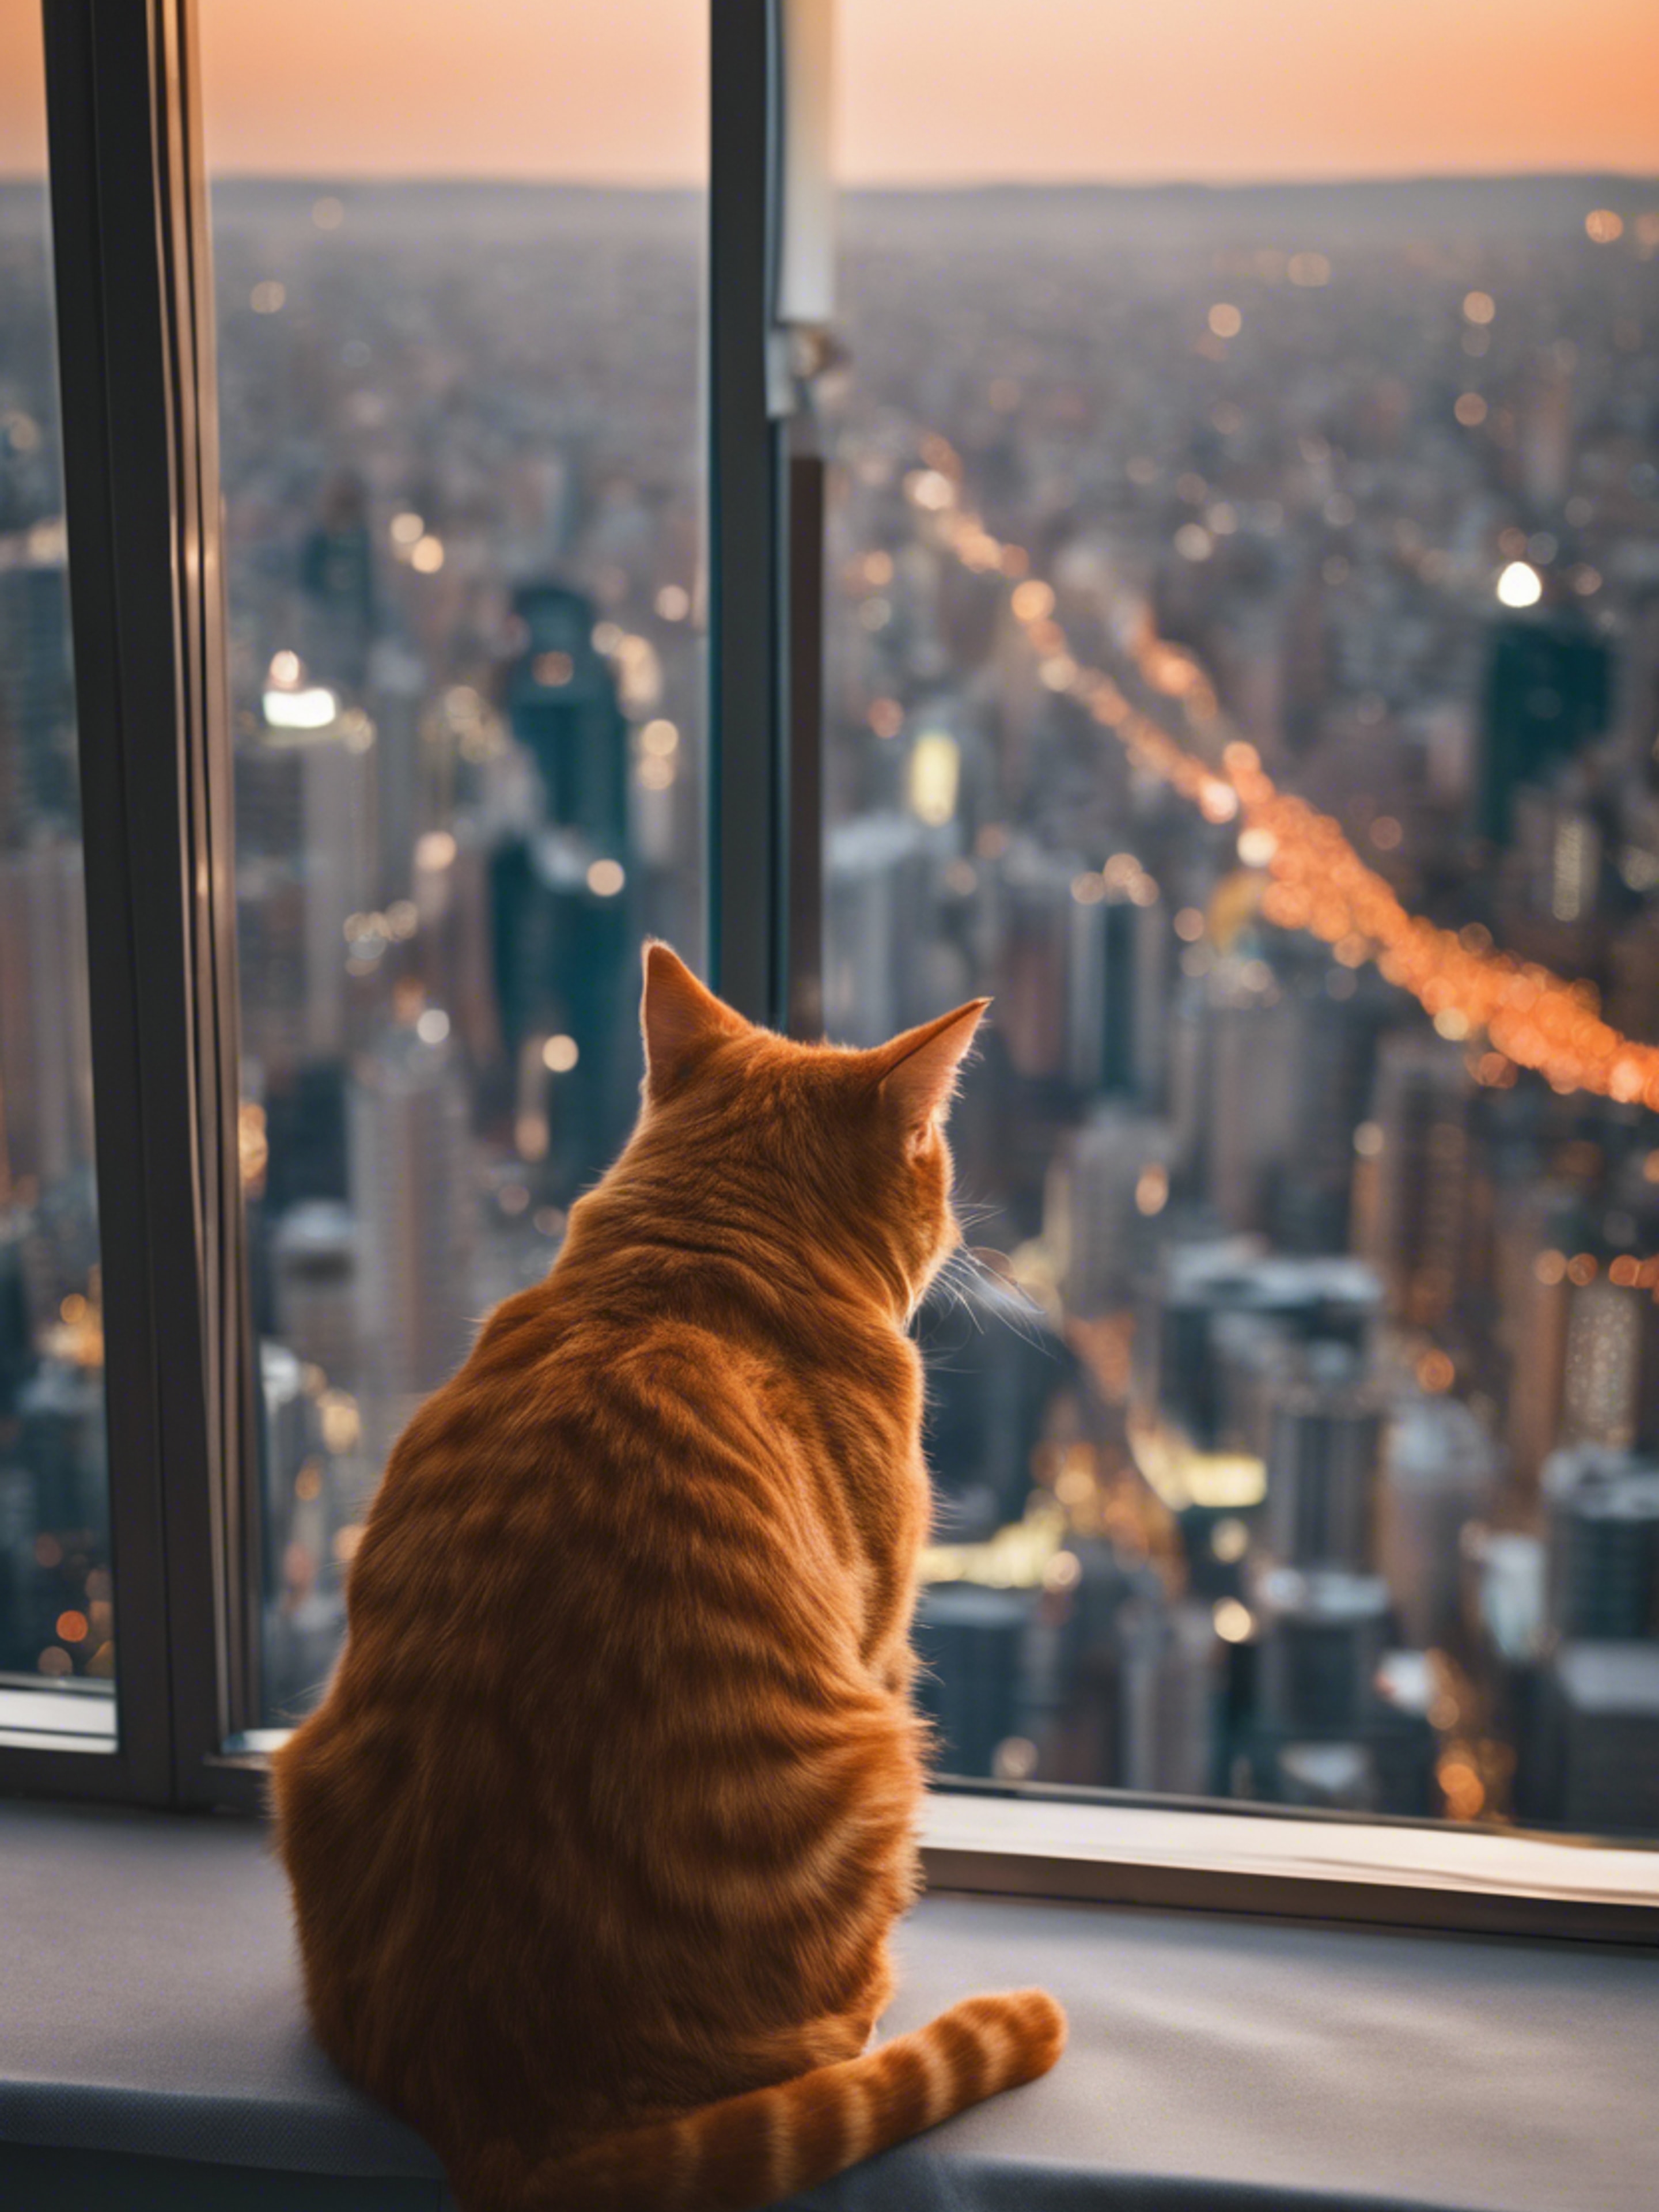 A large, orange tabby cat watching over the twinkling cityscape from a high-rise building window. Kertas dinding[7ba816be65f9424da00a]